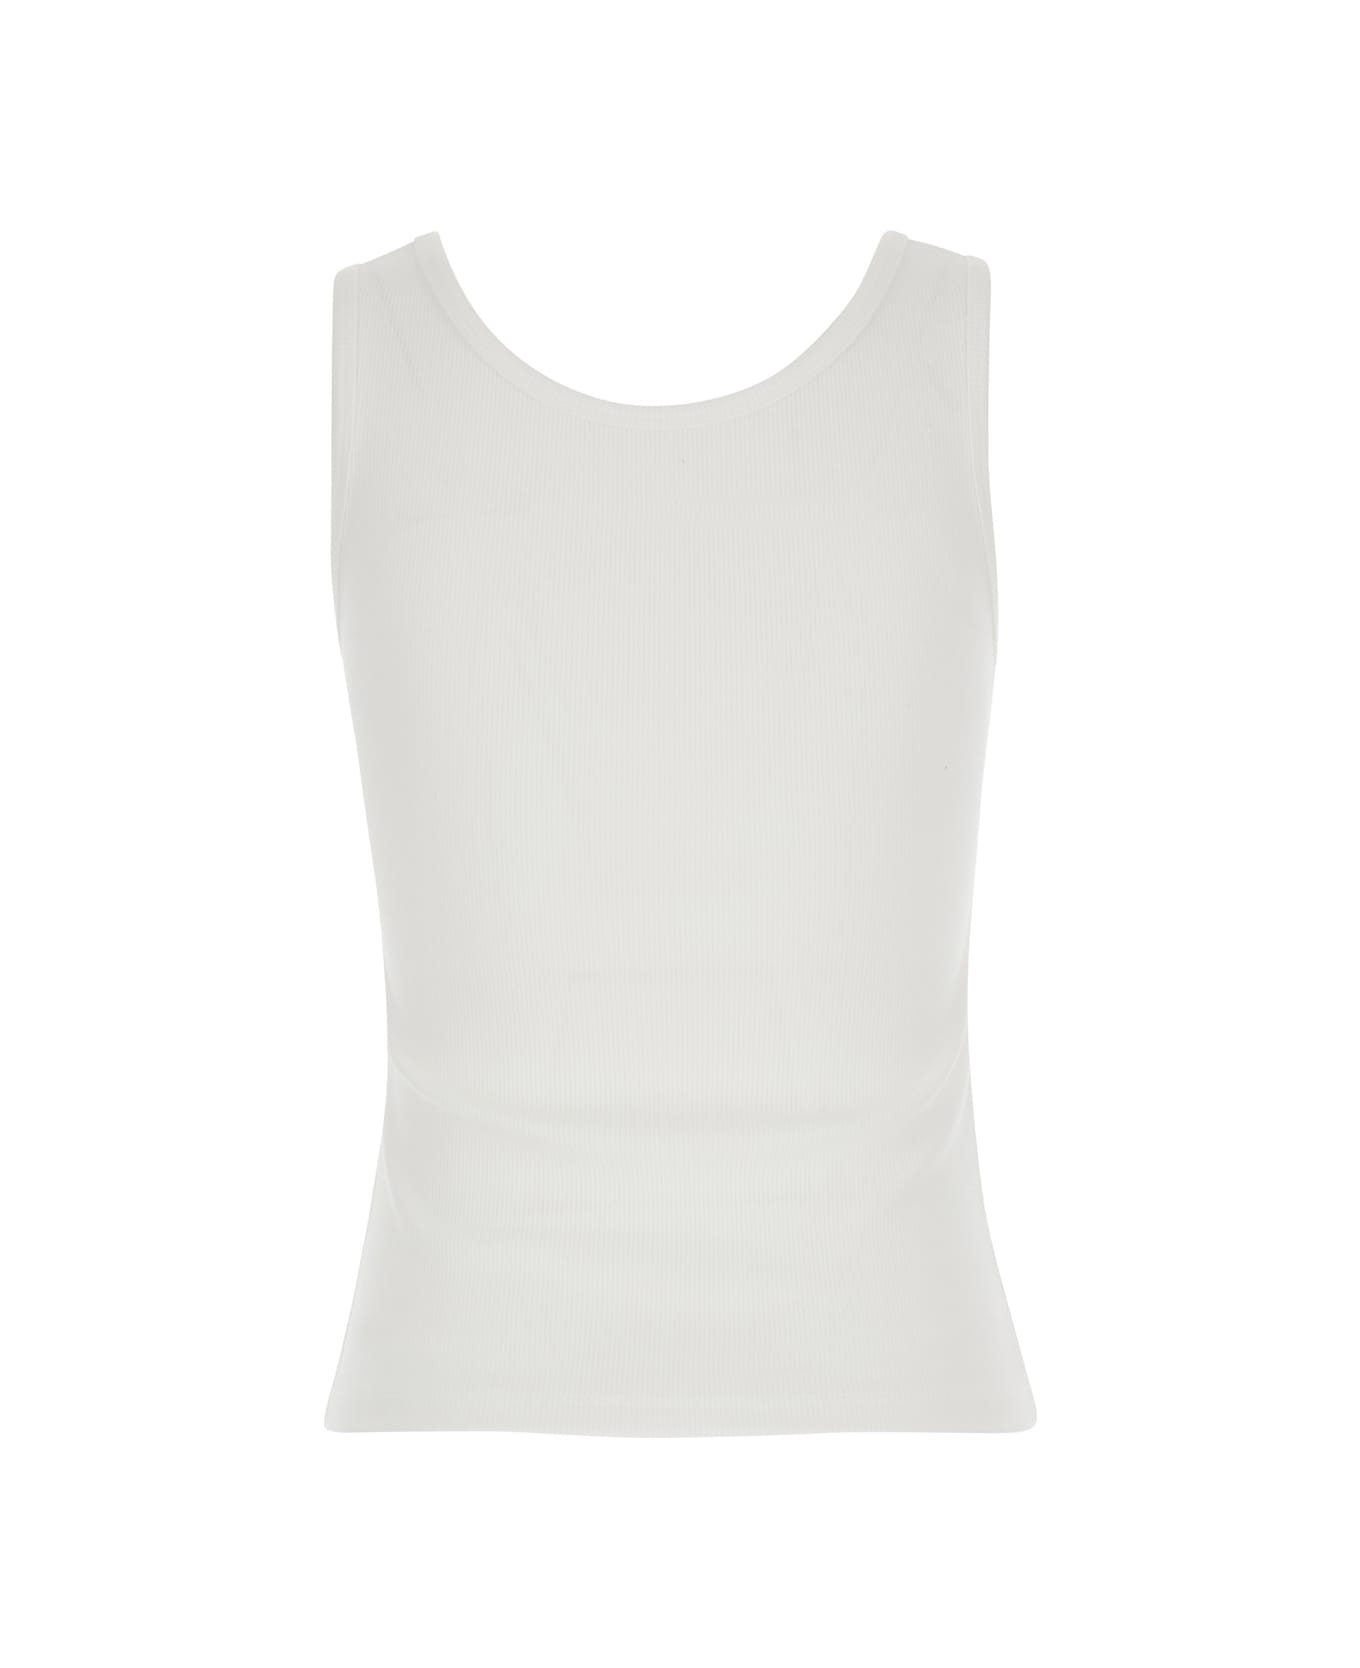 Dunst White Tank Top In Cotton Blend Woman - White